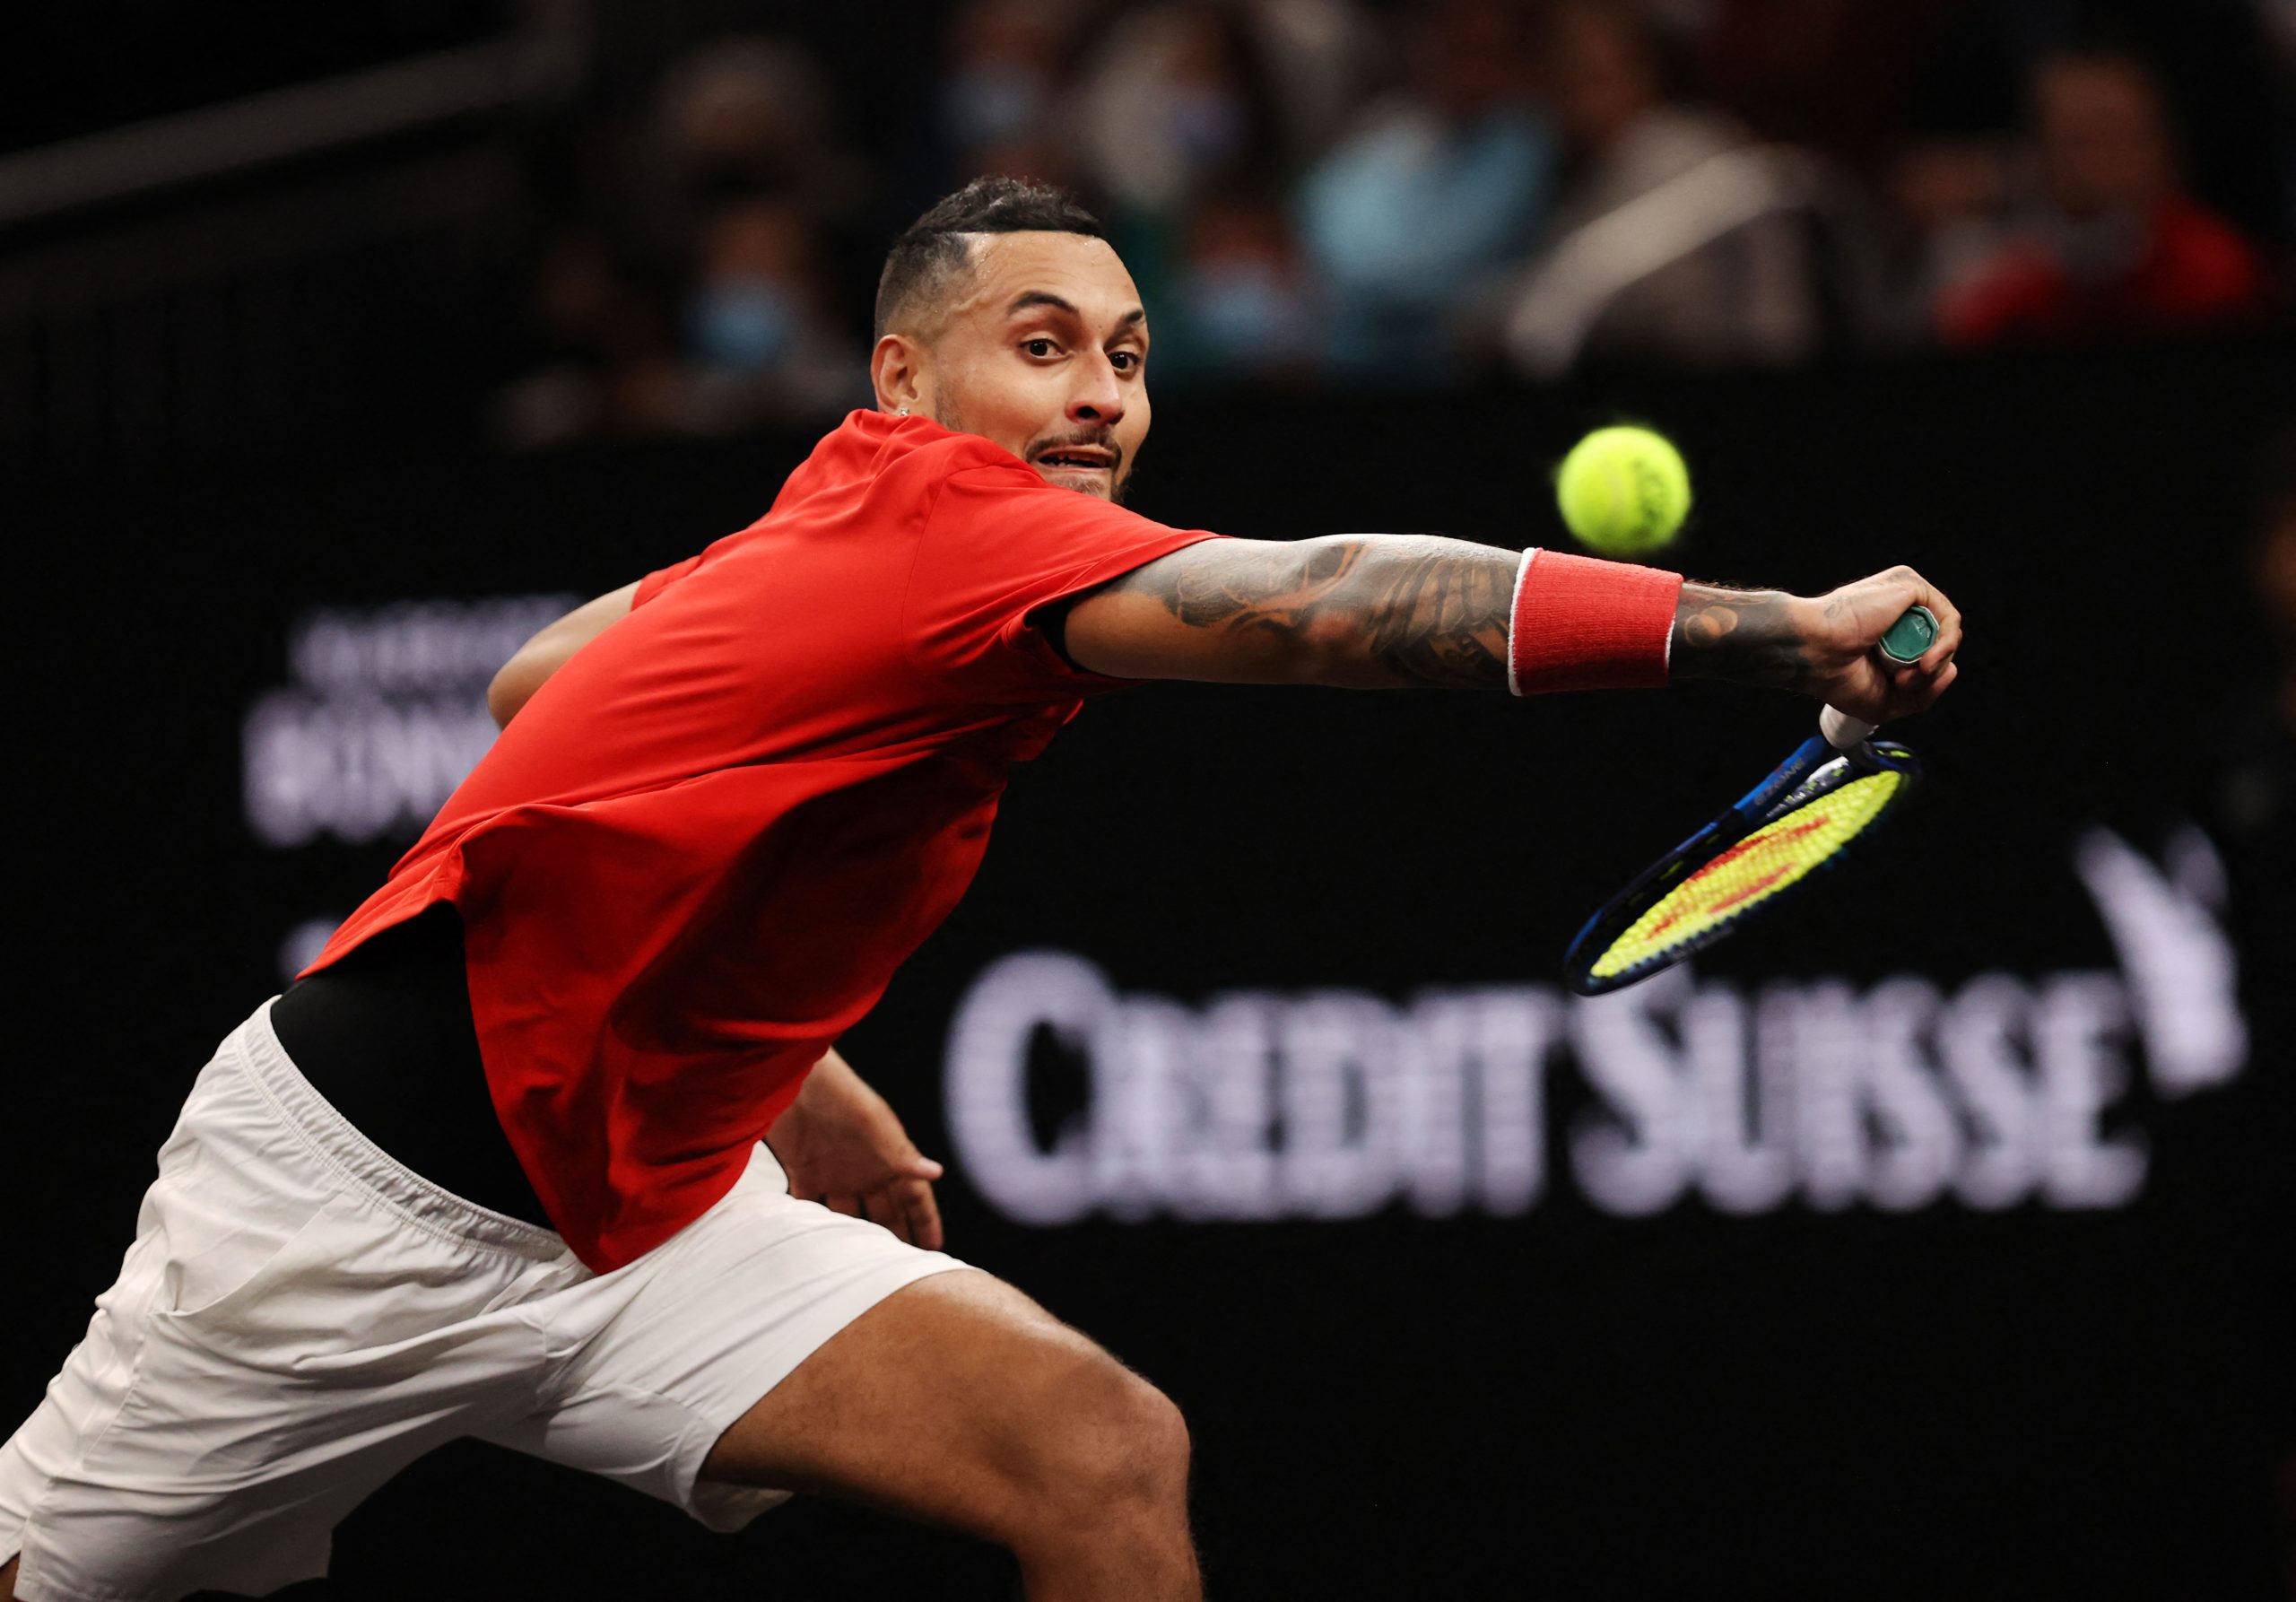 No Big Three would be disaster for Australian Open - Kyrgios